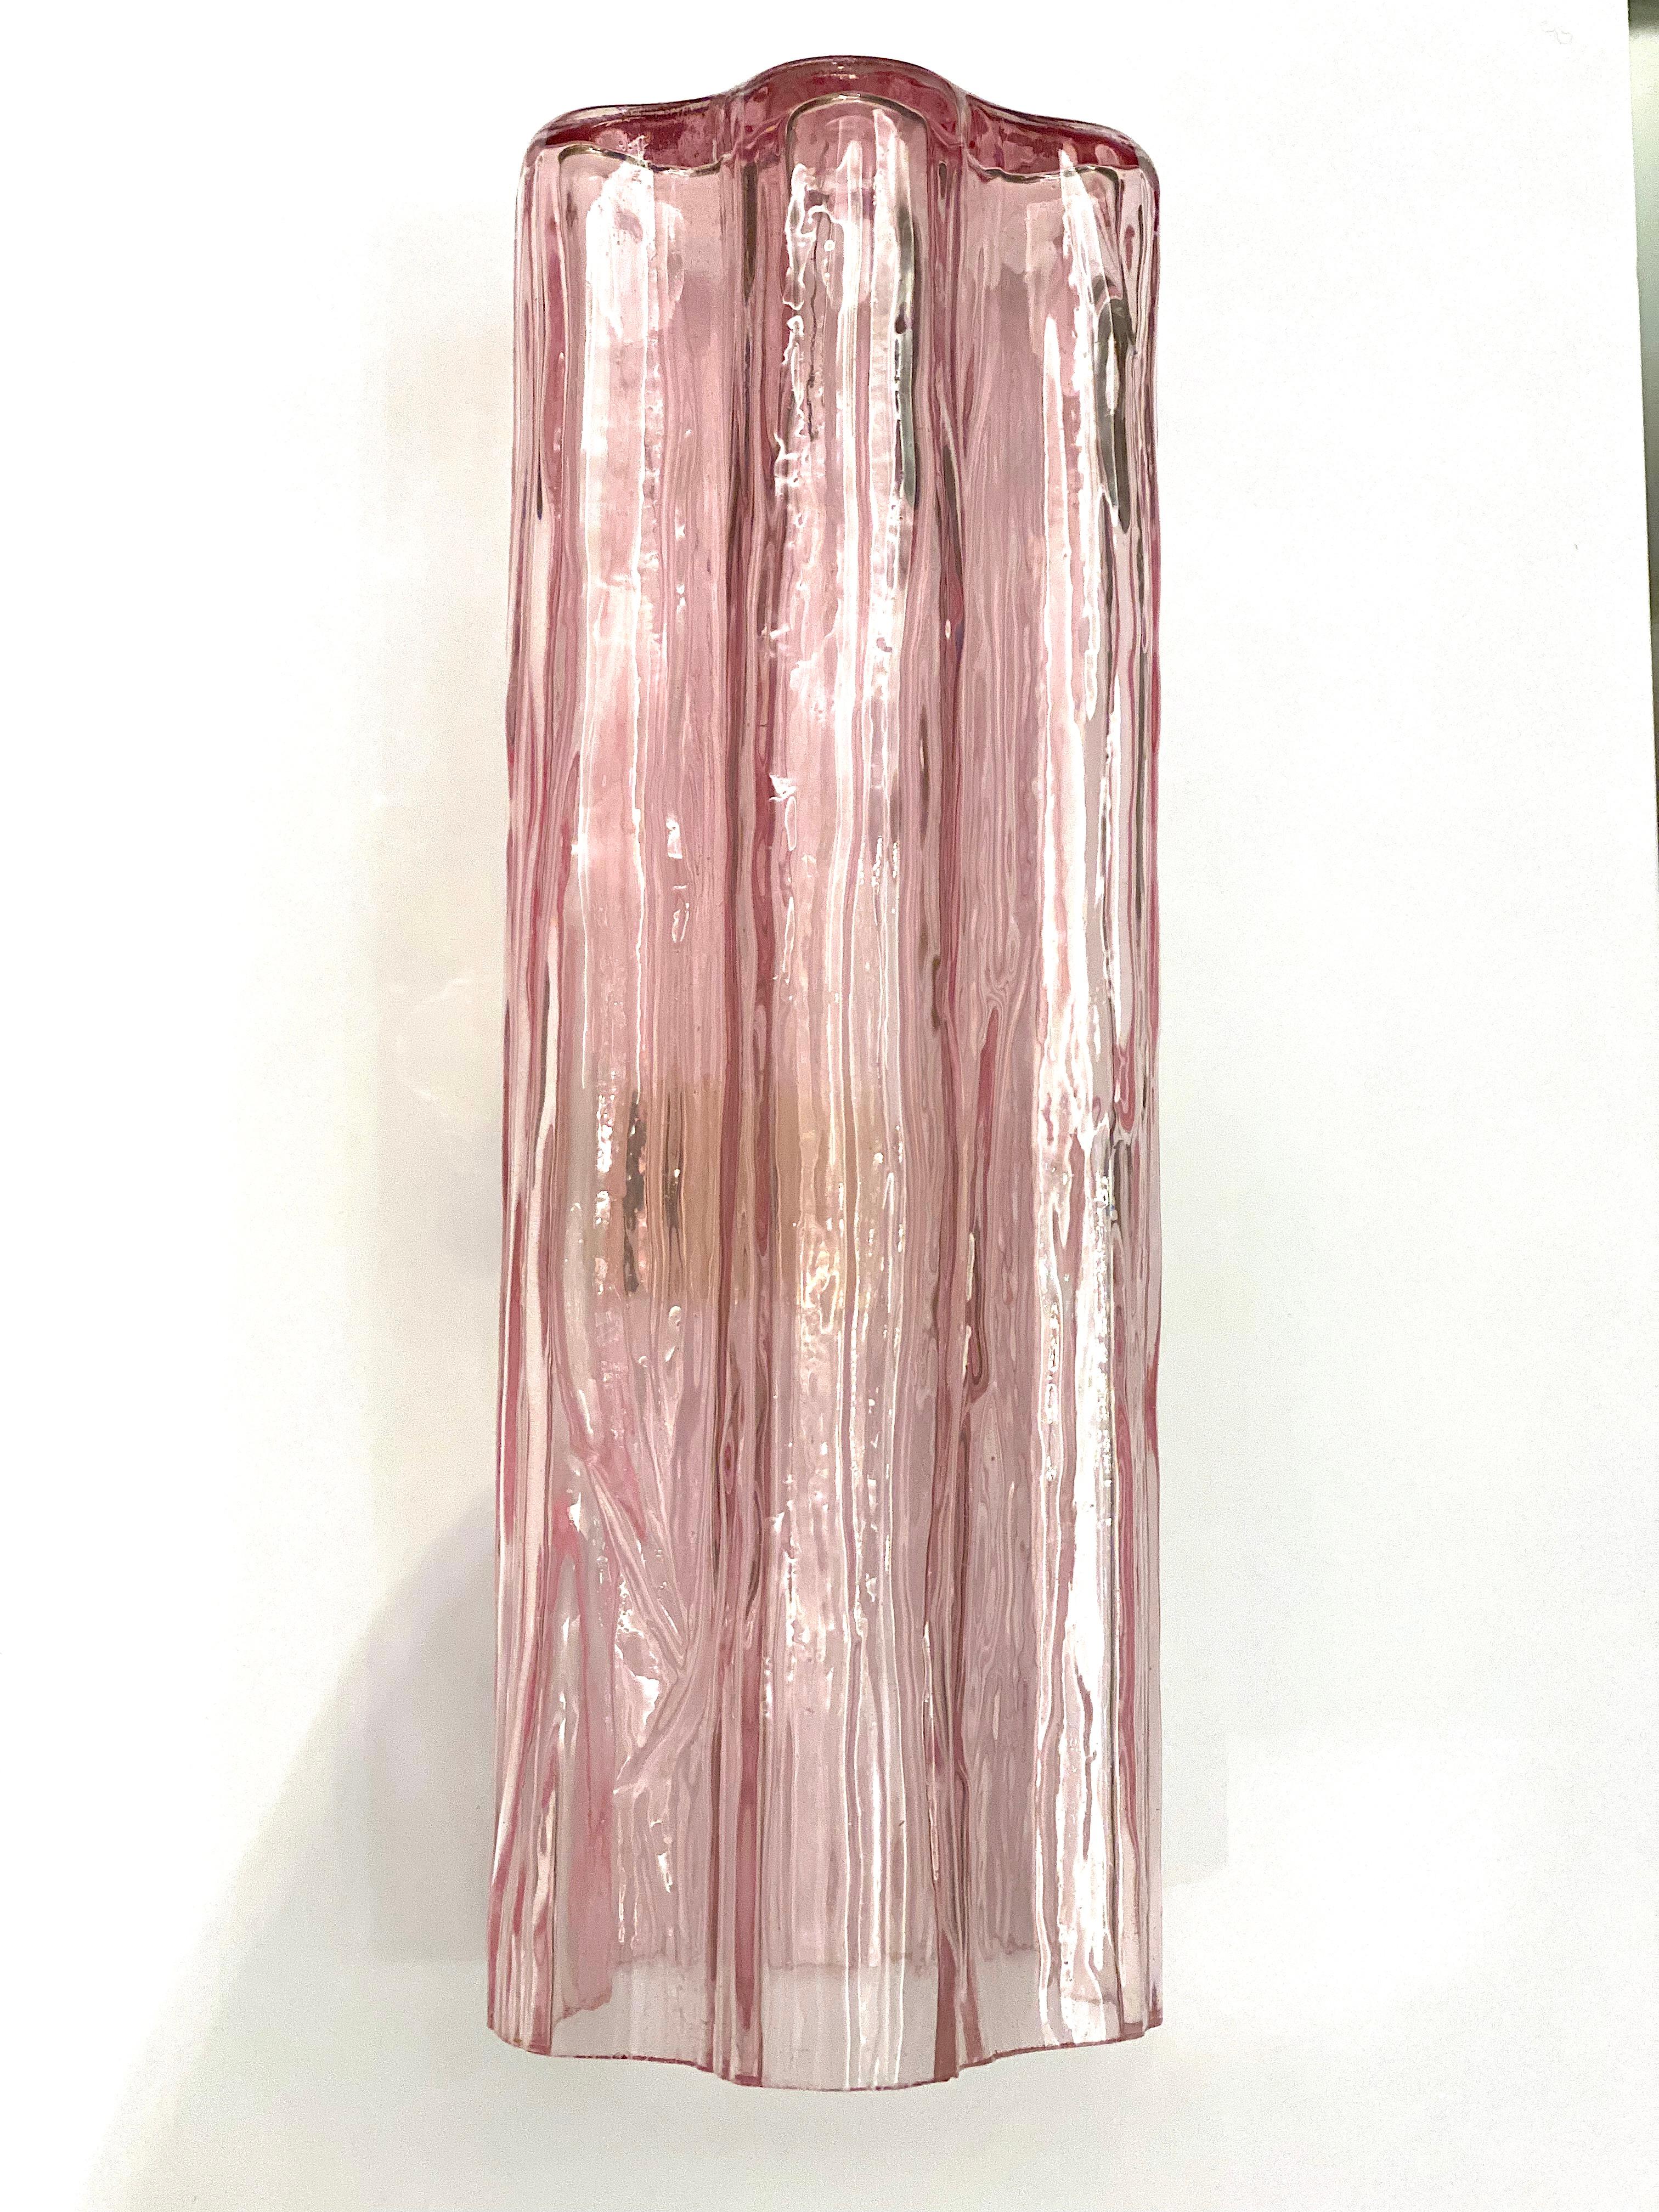 Contemporary Amazing Pink Tronchi Murano Glass Chandelier For Sale